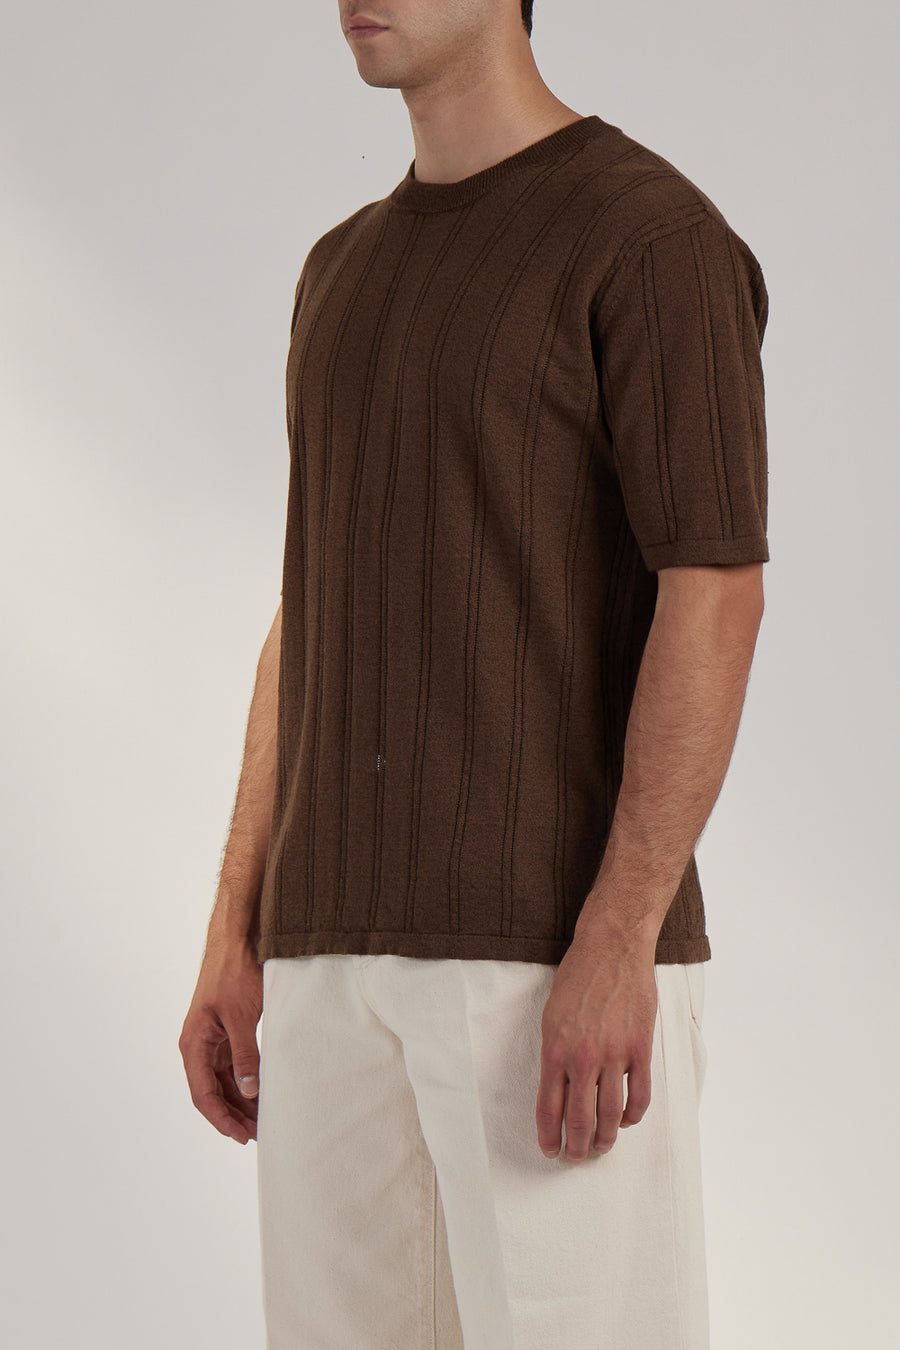 Buy the Daniele Fiesoli Ribbed Crew Neck T-Shirt in Brown at Intro. Spend £50 for free UK delivery. Official stockists. We ship worldwide.